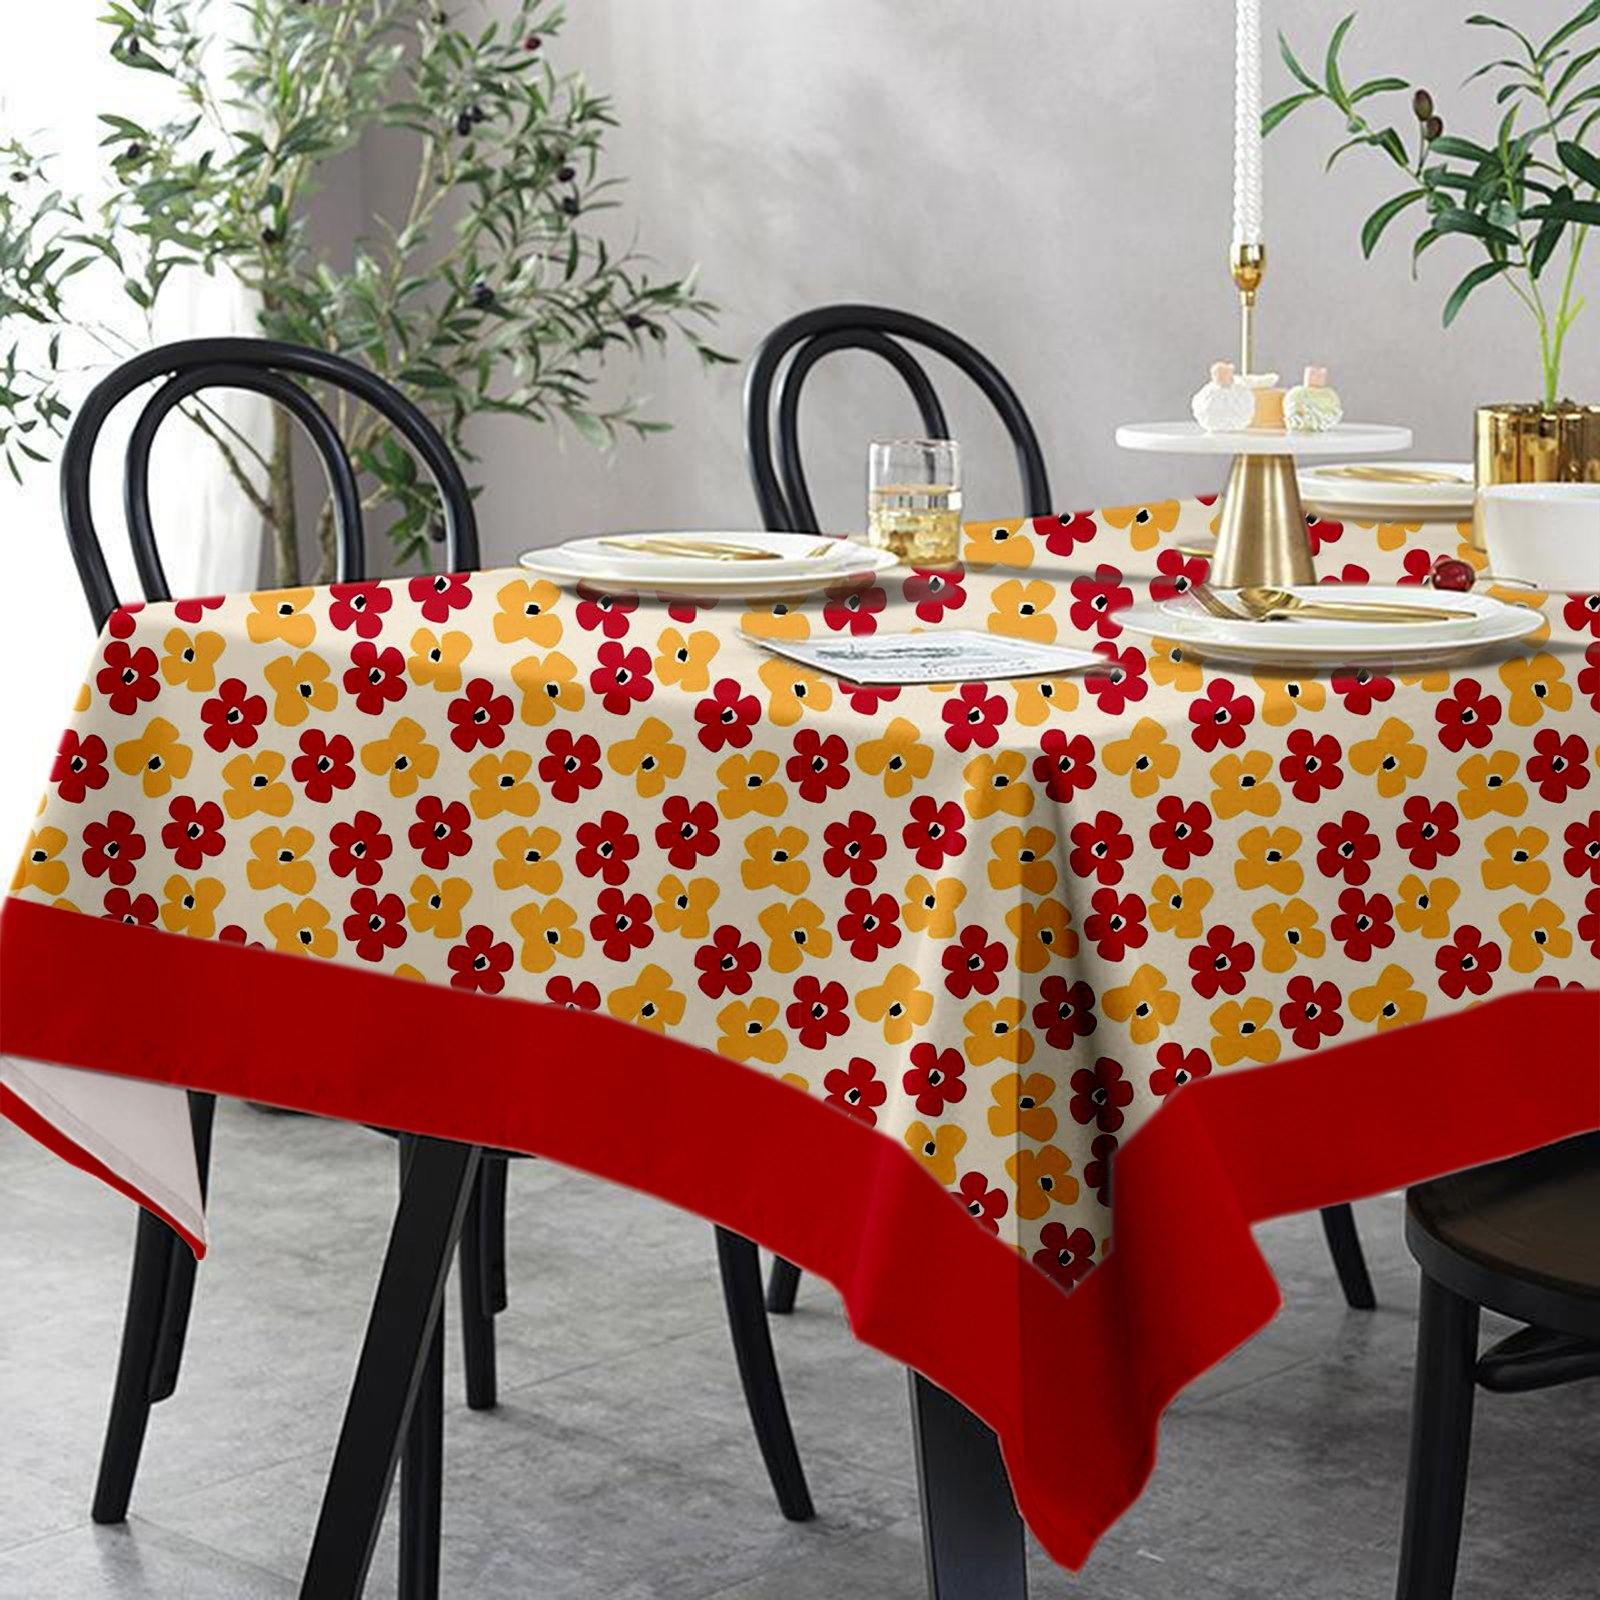 Lushomes 8 Seater Basic Printed Dining Table Cover Cloth Linen (Pack of 1, 108 x 60 inches) - Lushomes